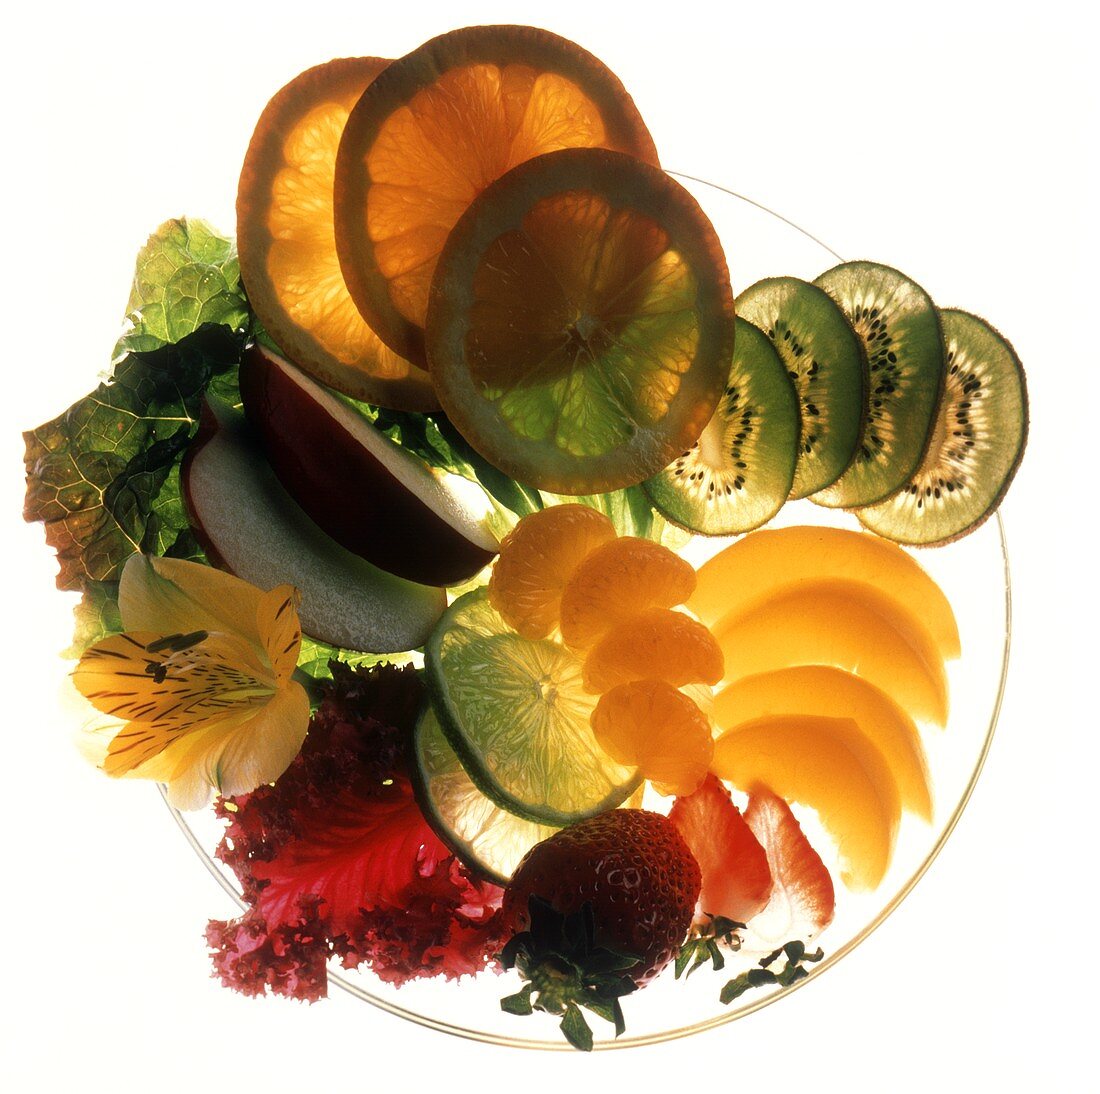 Assorted Fruit Slices on a Plate